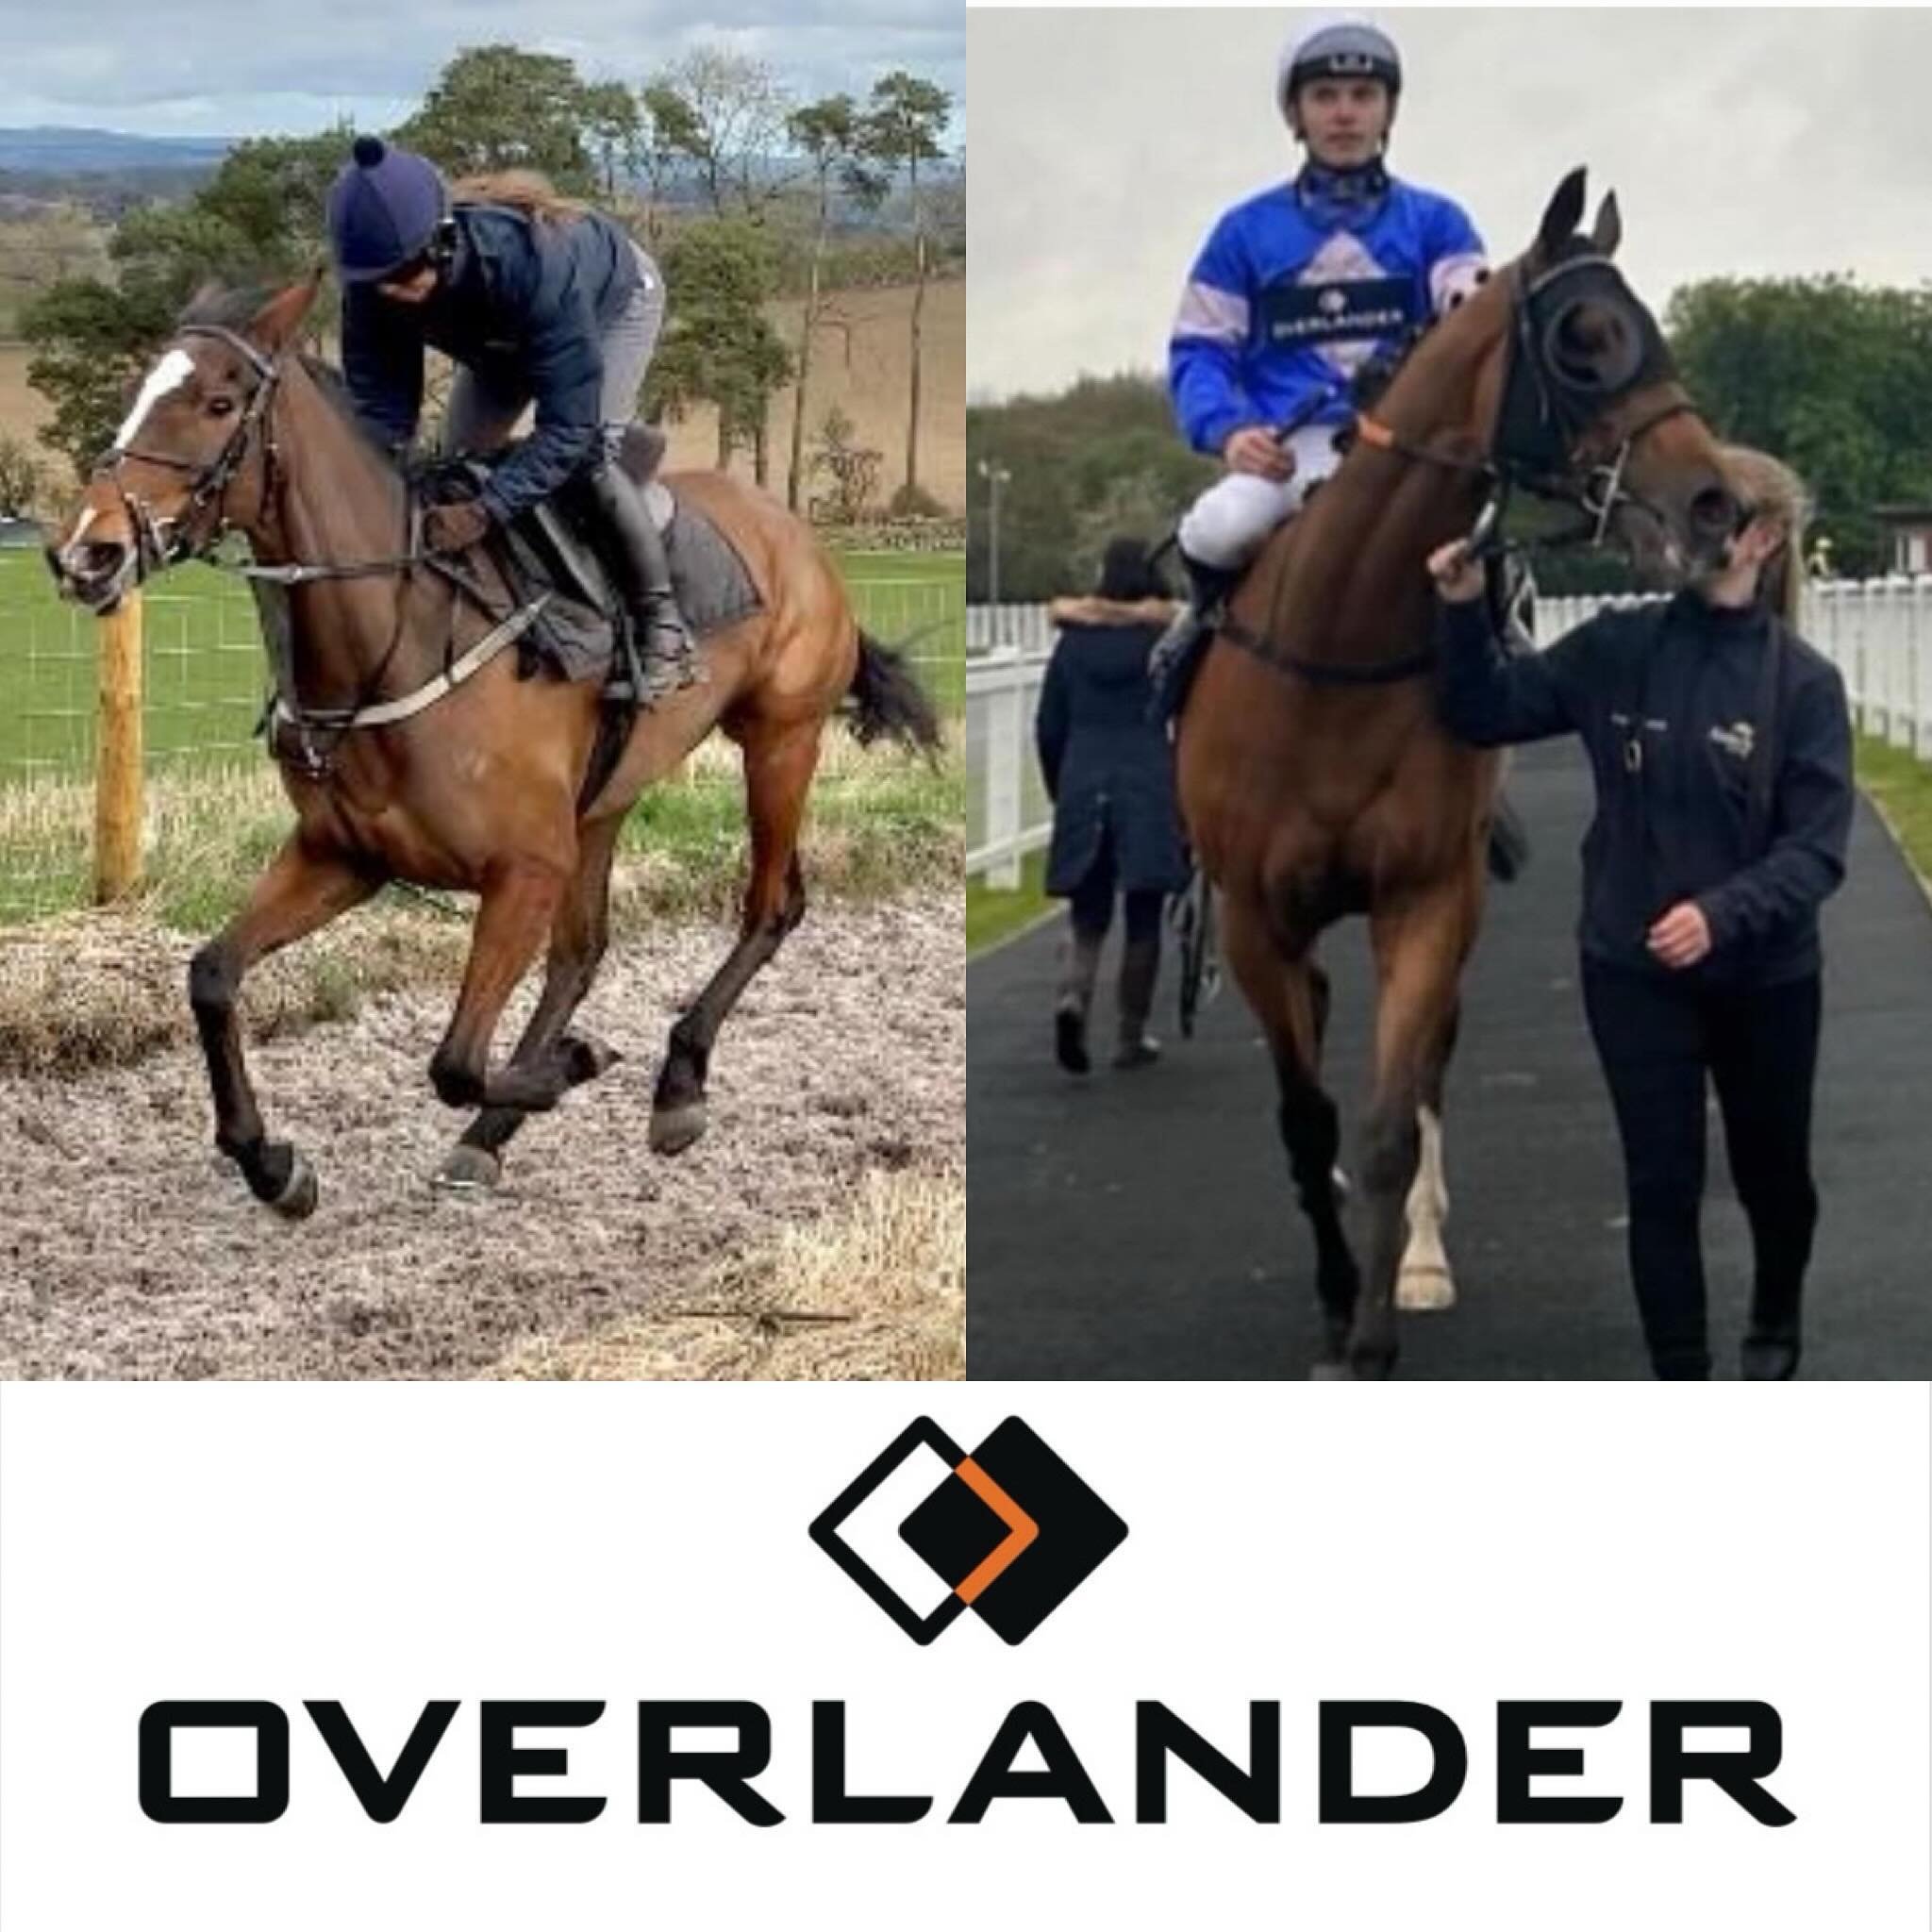 Todays runners

@perthracecourse 

5.00 Crafty Dancer for Richard and Nicola Clark in the hands of Paddy Wadge.

@newcastleraces 

9.00 Rockley Point for The Vintage Flyers in the hands of Phil Dennis 

Good Luck Everyone 
🍀🍀🍀

@overlandervehicles